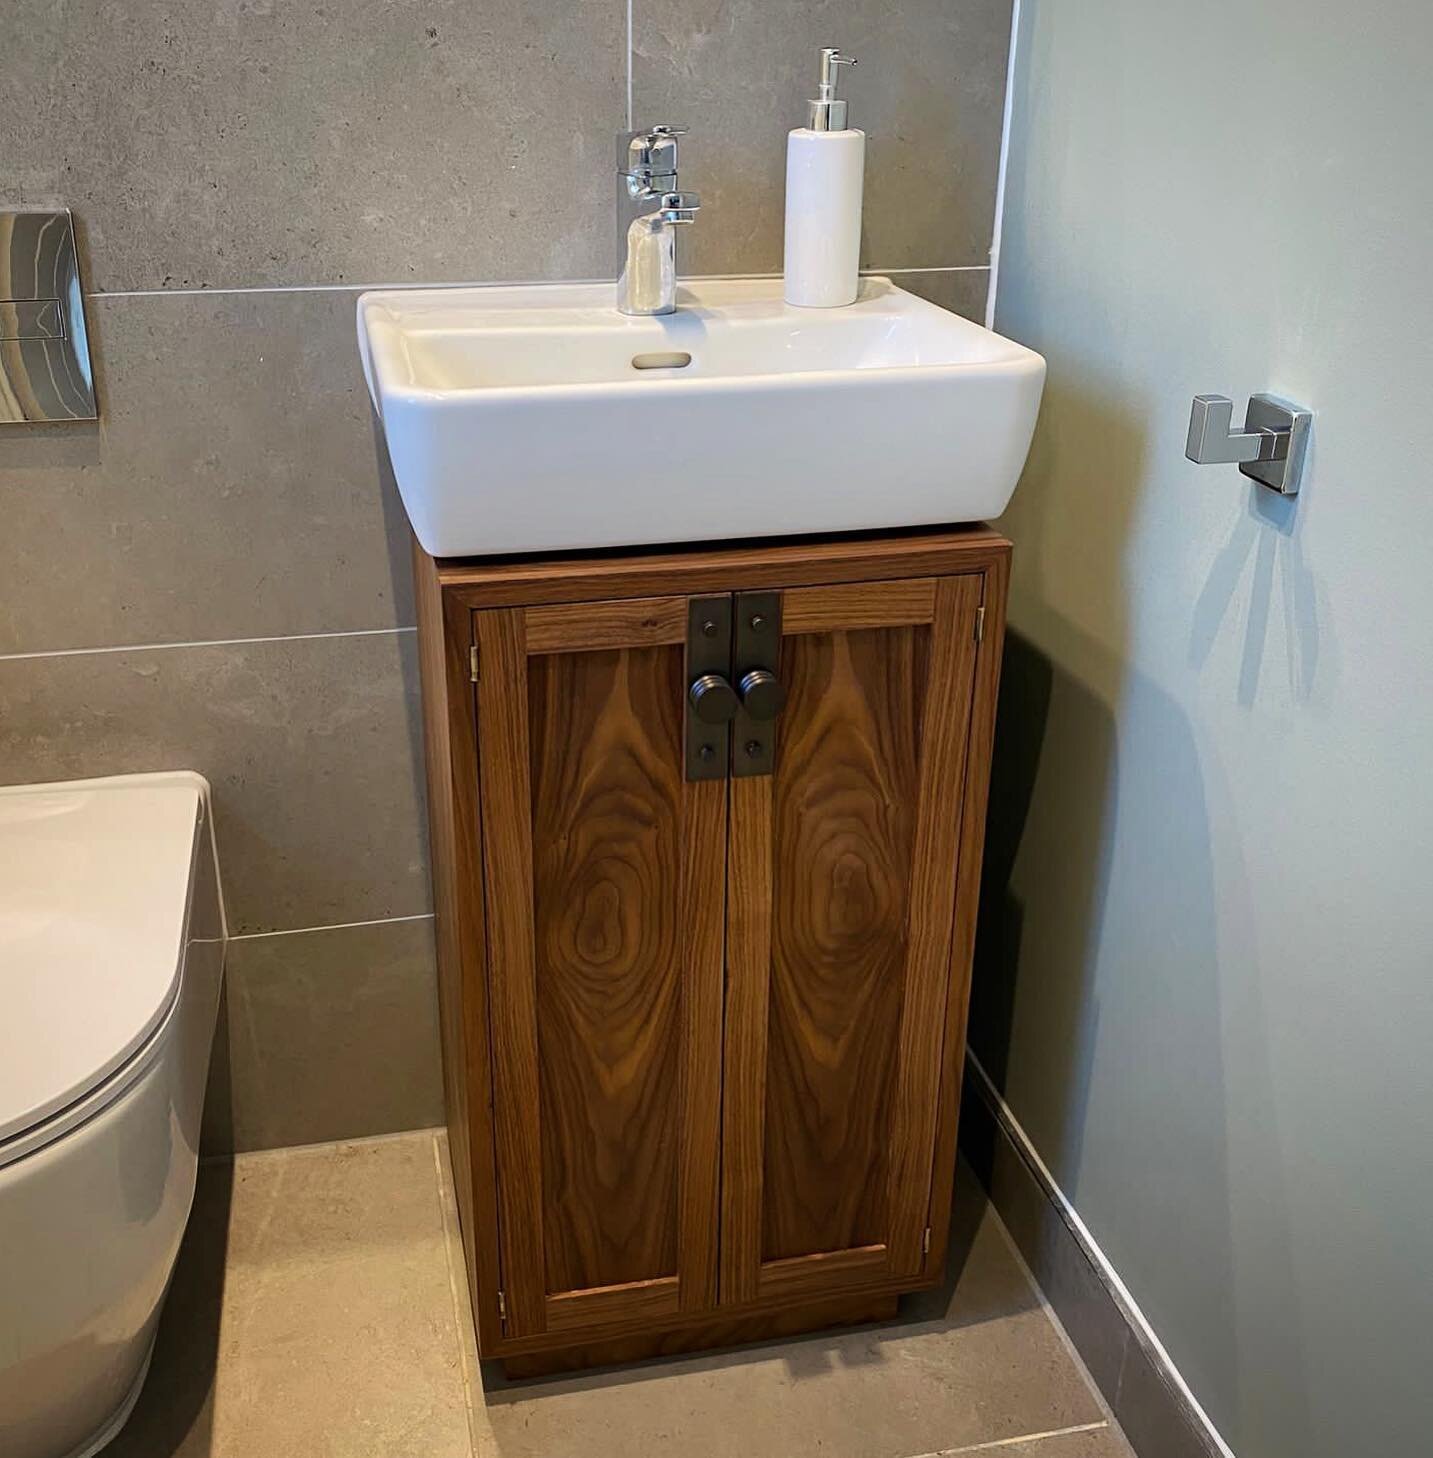 This walnut vanity is another commission from our wonderful clients down south. Installed into their guest bathroom, it is designed to fit the small space and existing sink while offering some storage and elevating the design aesthetic.
.
.

#worksho